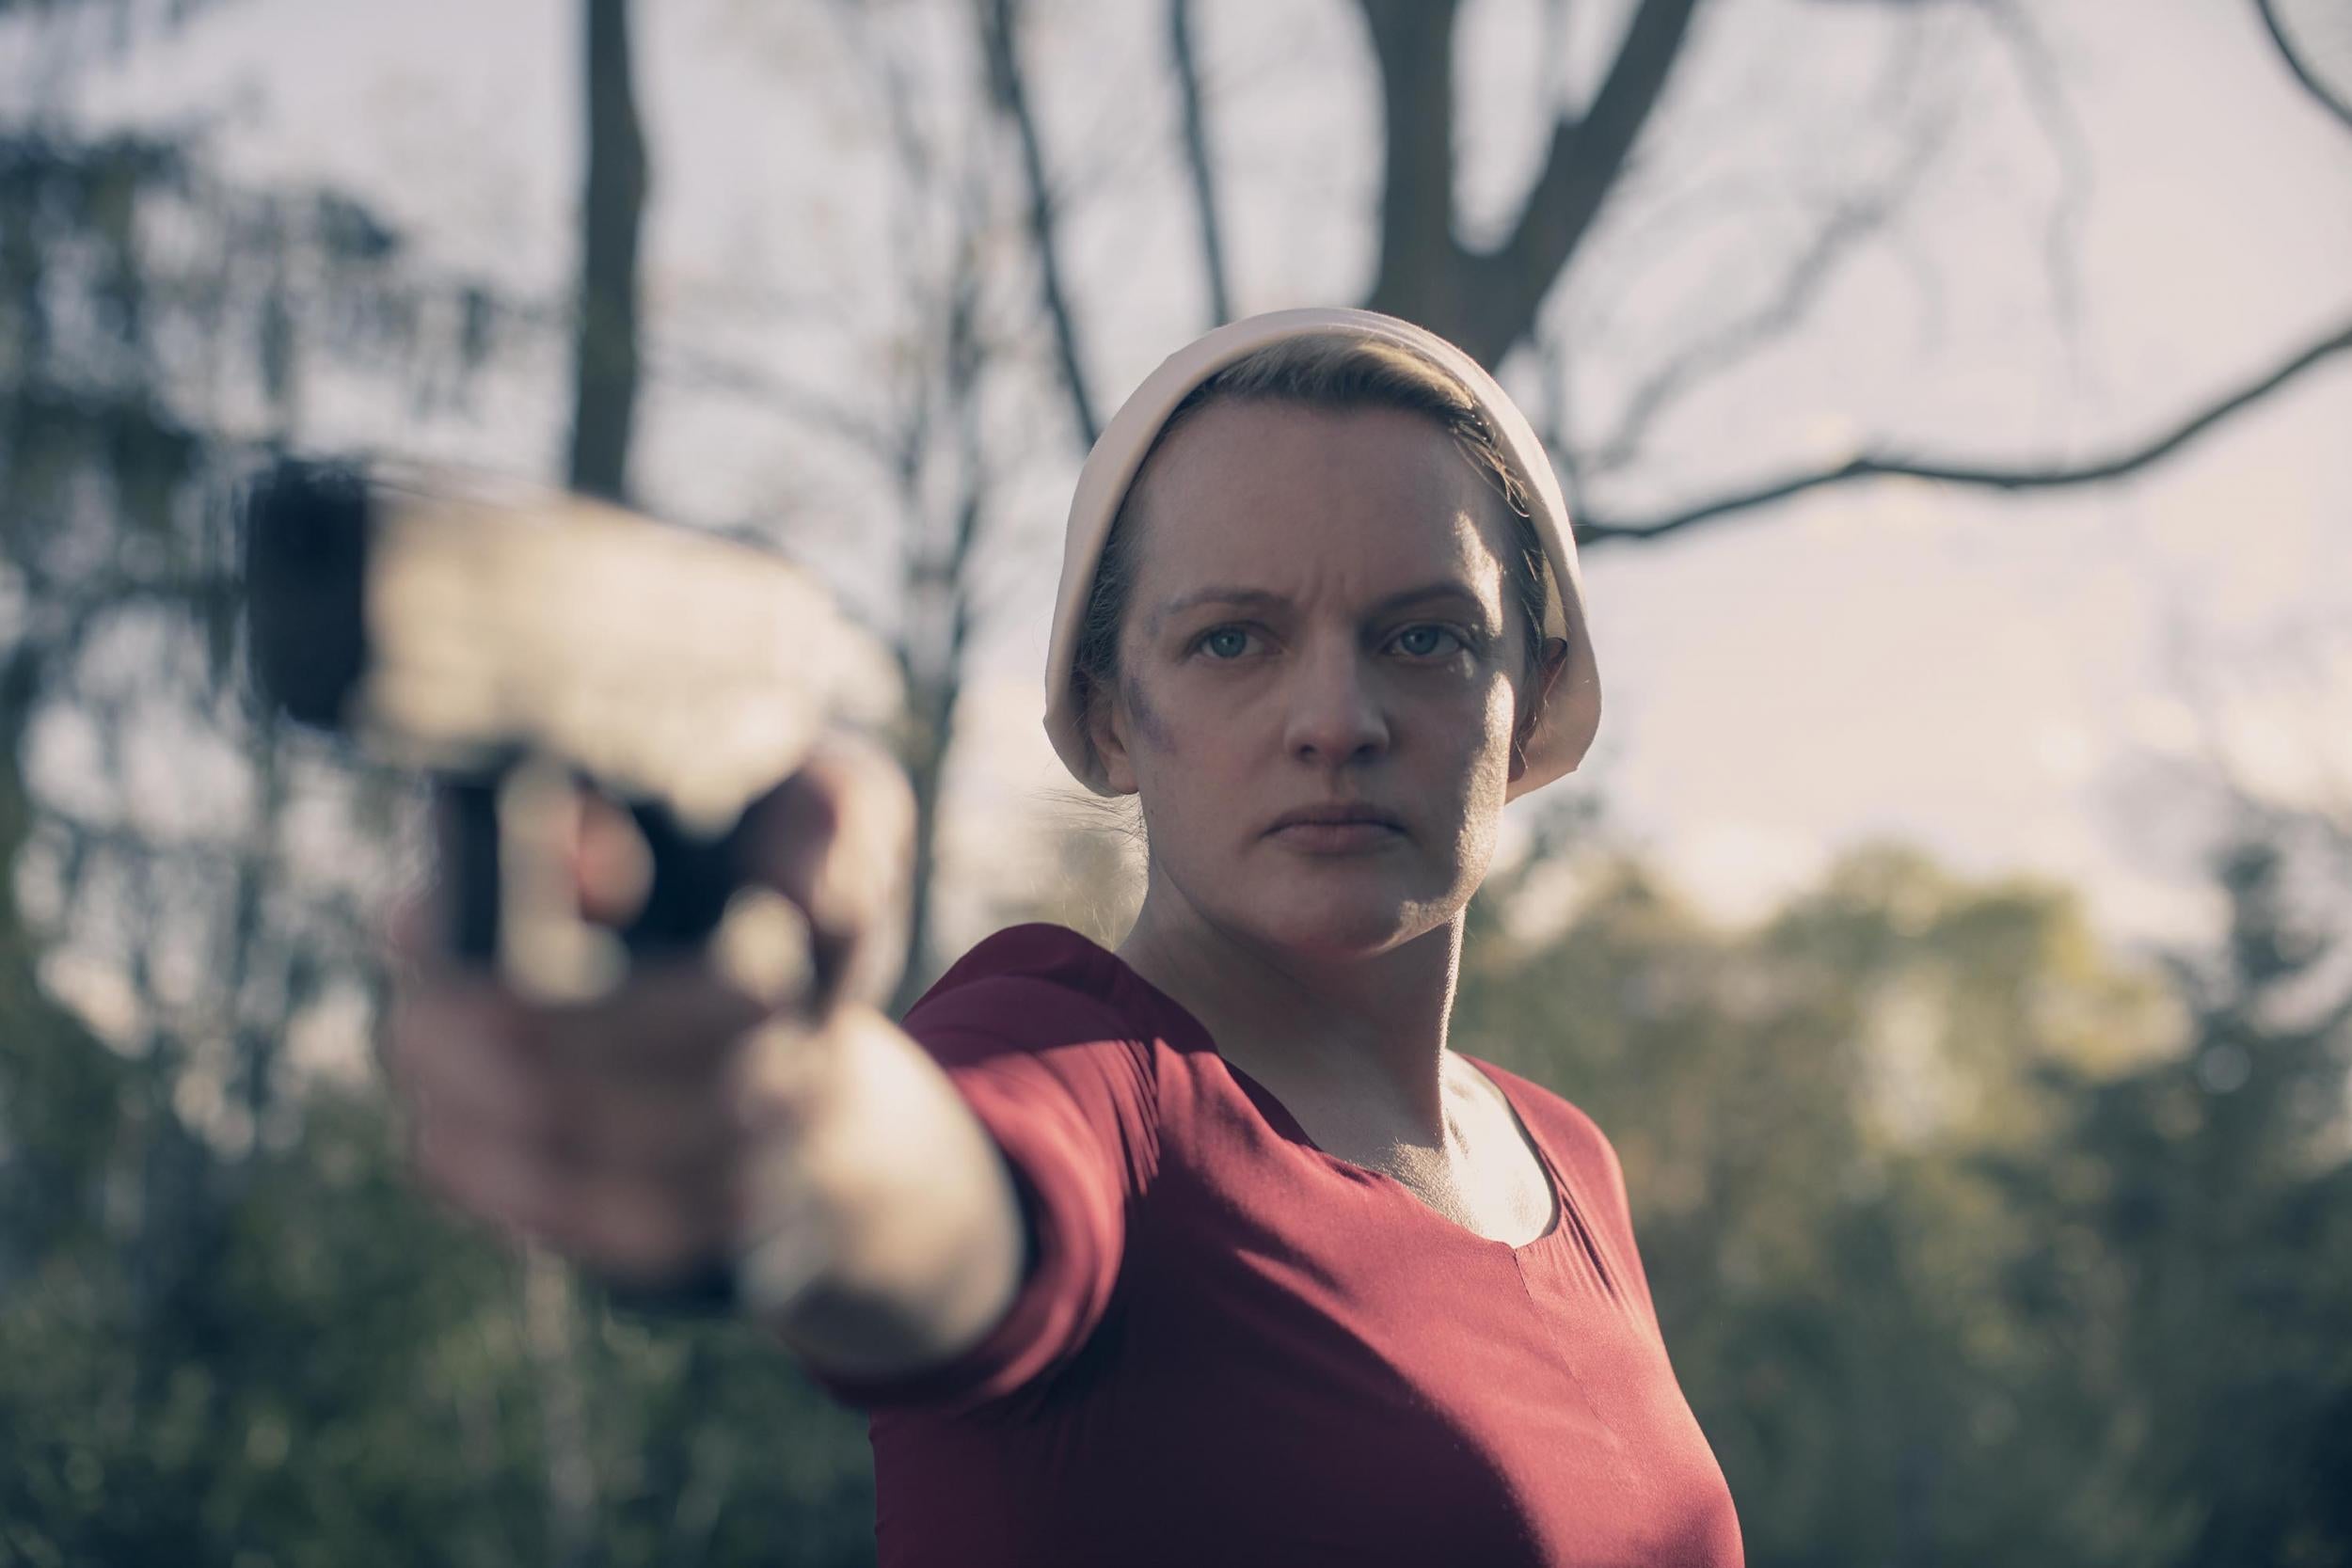 ‘The Handmaid’s Tale’ TV series has moved past the books